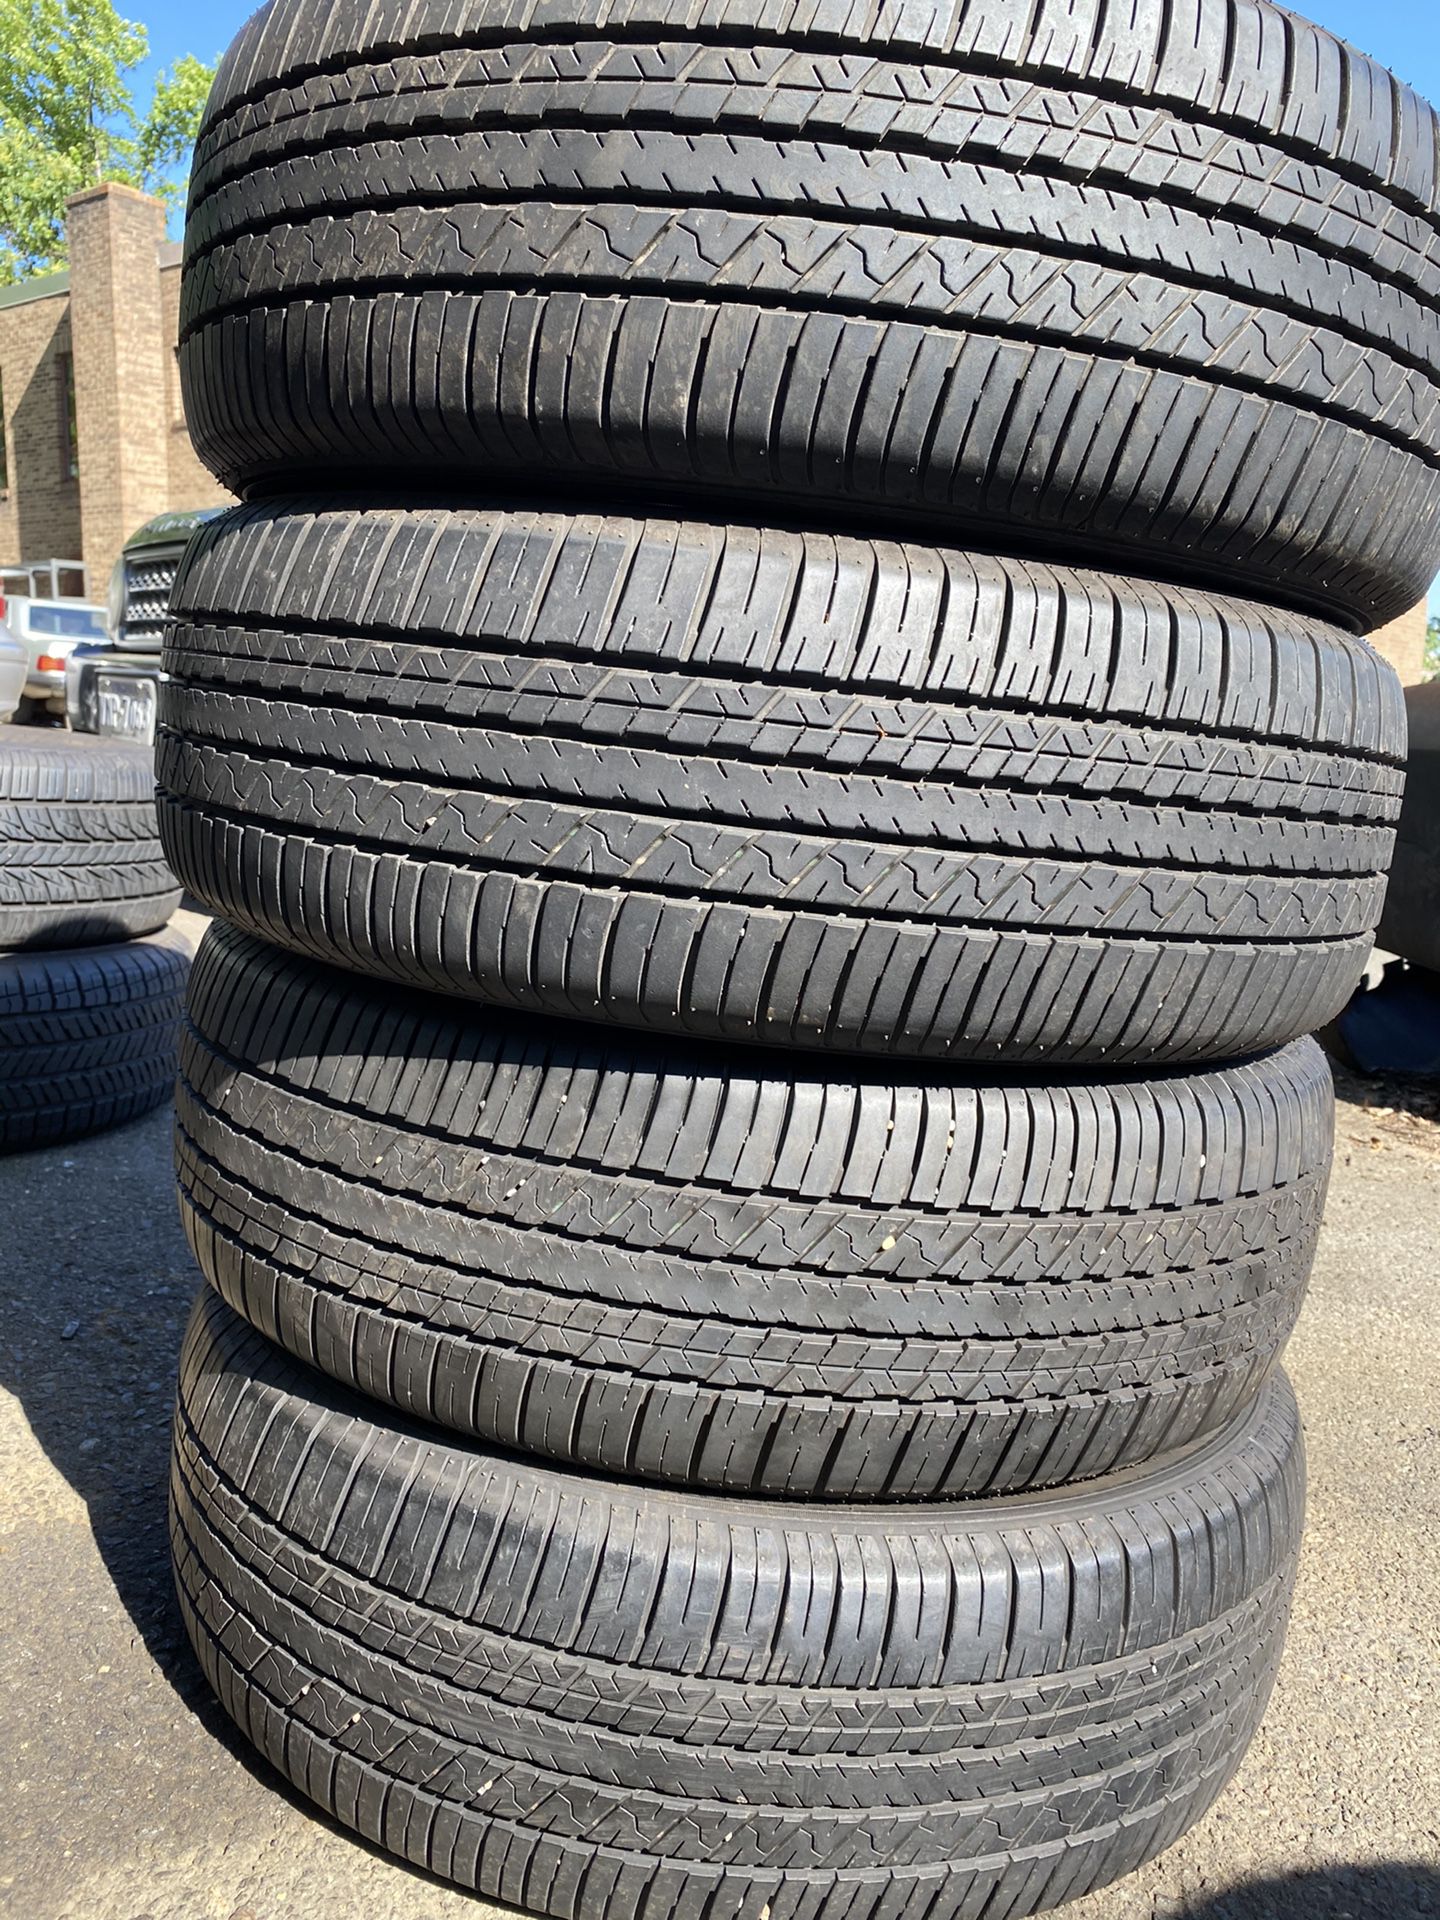 Set 4 usted tire 225/60R18 FALKEN one have parch set 4 used tire $130